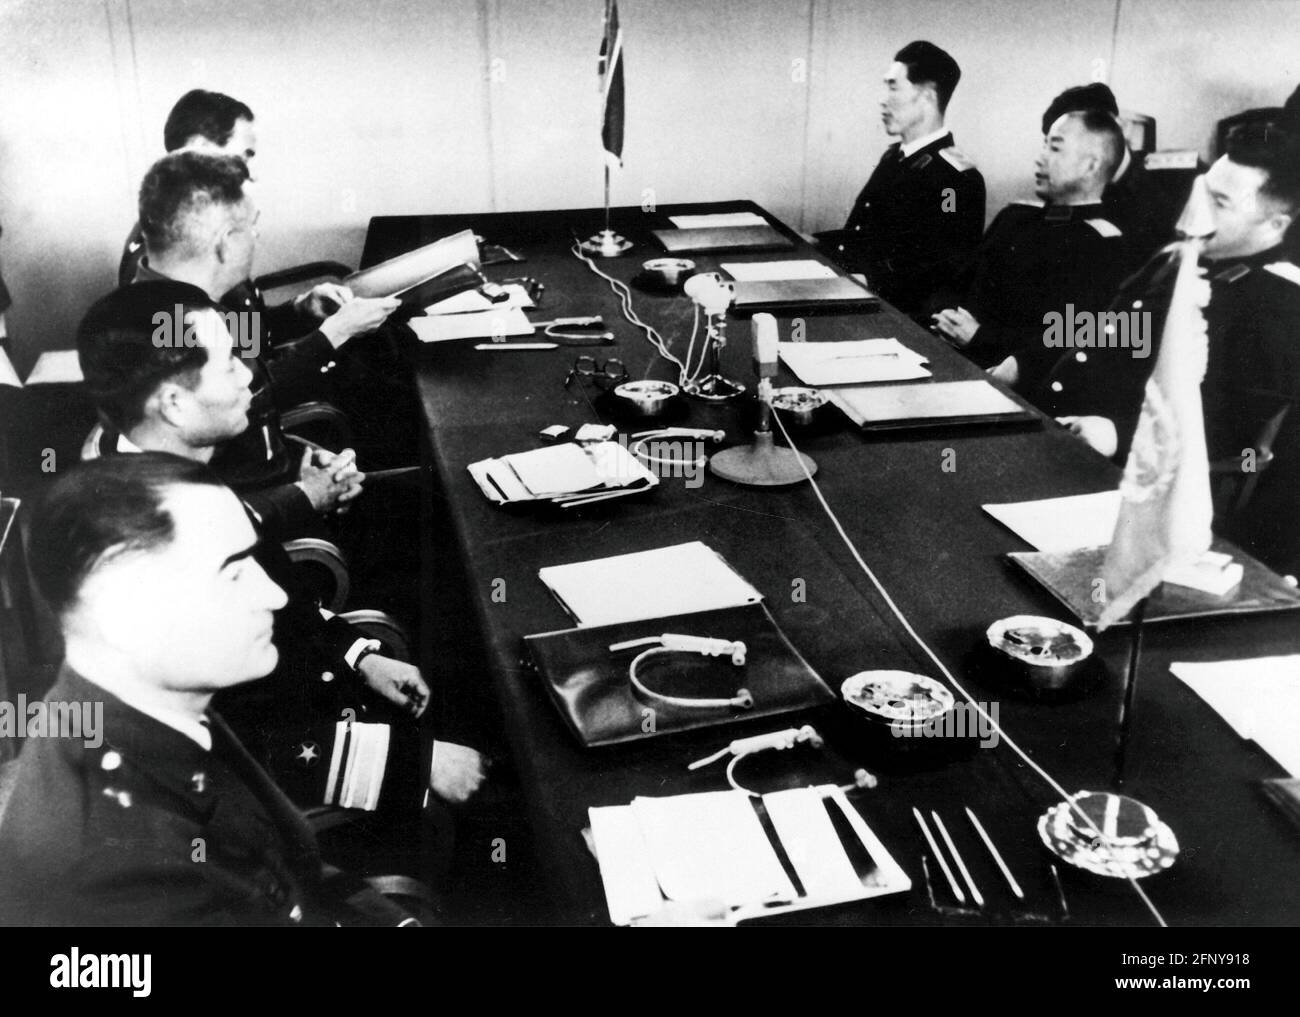 events, Korean War 1950 - 1953, armistice negotiations in Panmunjom, 1952, conference table, ADDITIONAL-RIGHTS-CLEARANCE-INFO-NOT-AVAILABLE Stock Photo